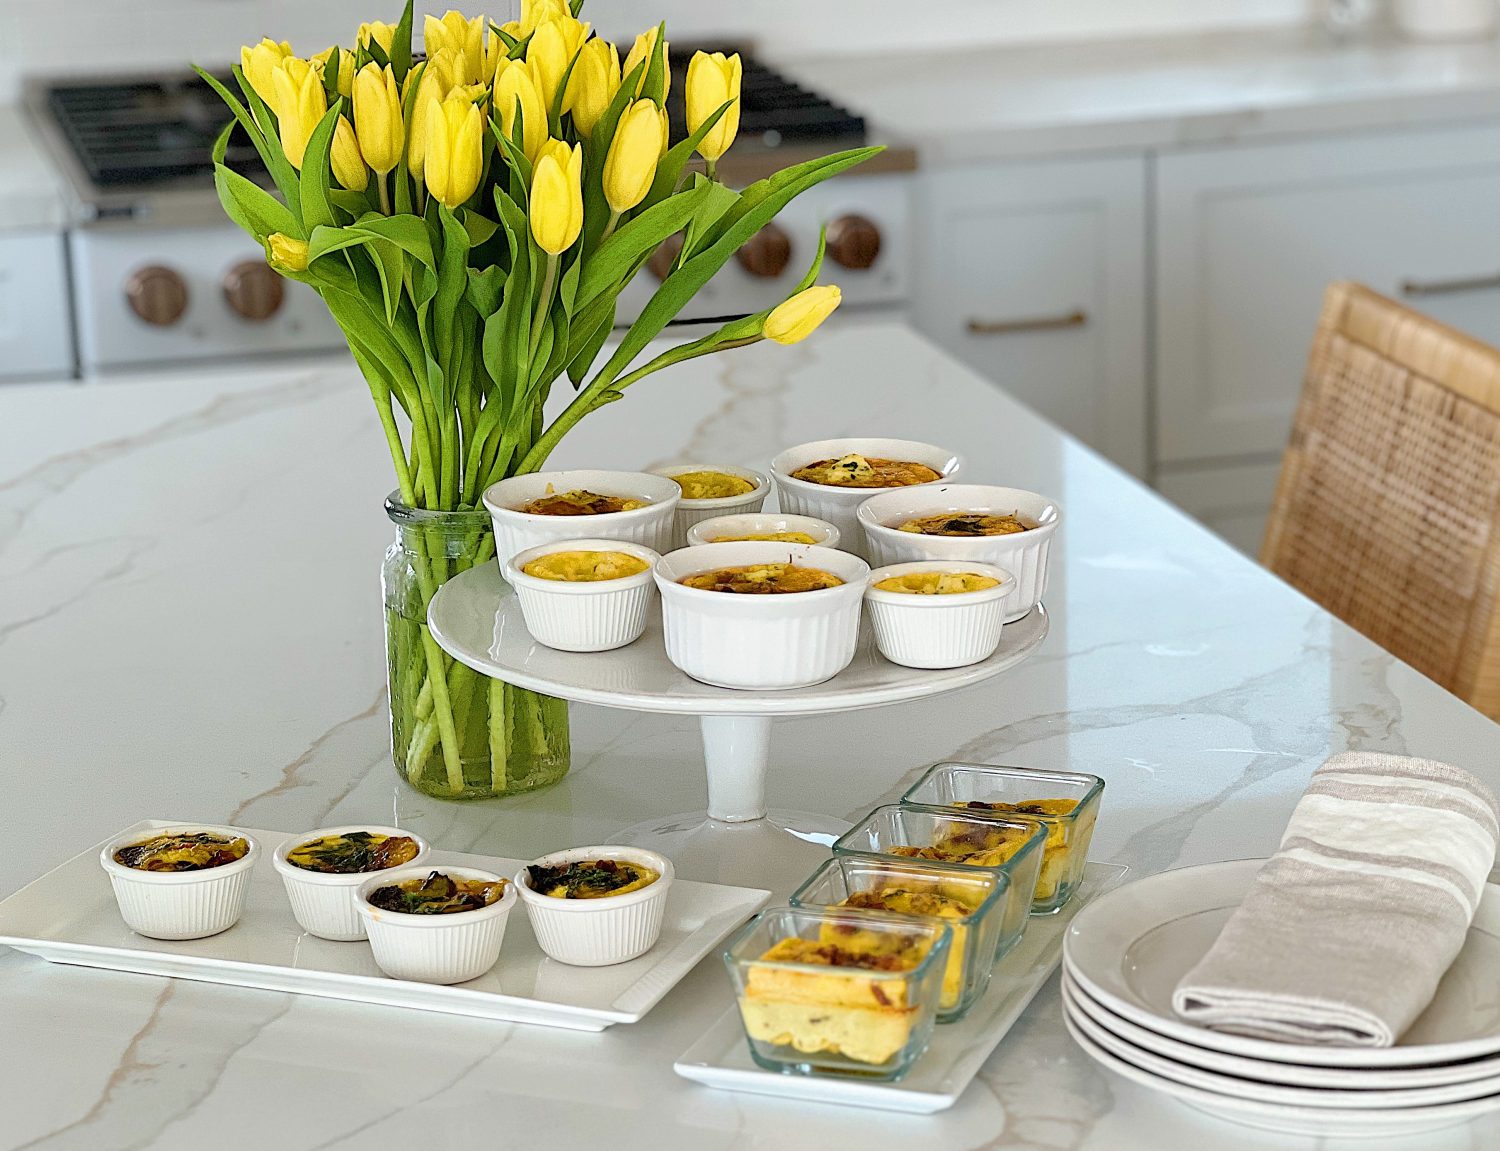 https://my100yearoldhome.com/wp-content/uploads/2023/04/Mothers-Day-Brunch-Buffet-Recipes.-.jpeg